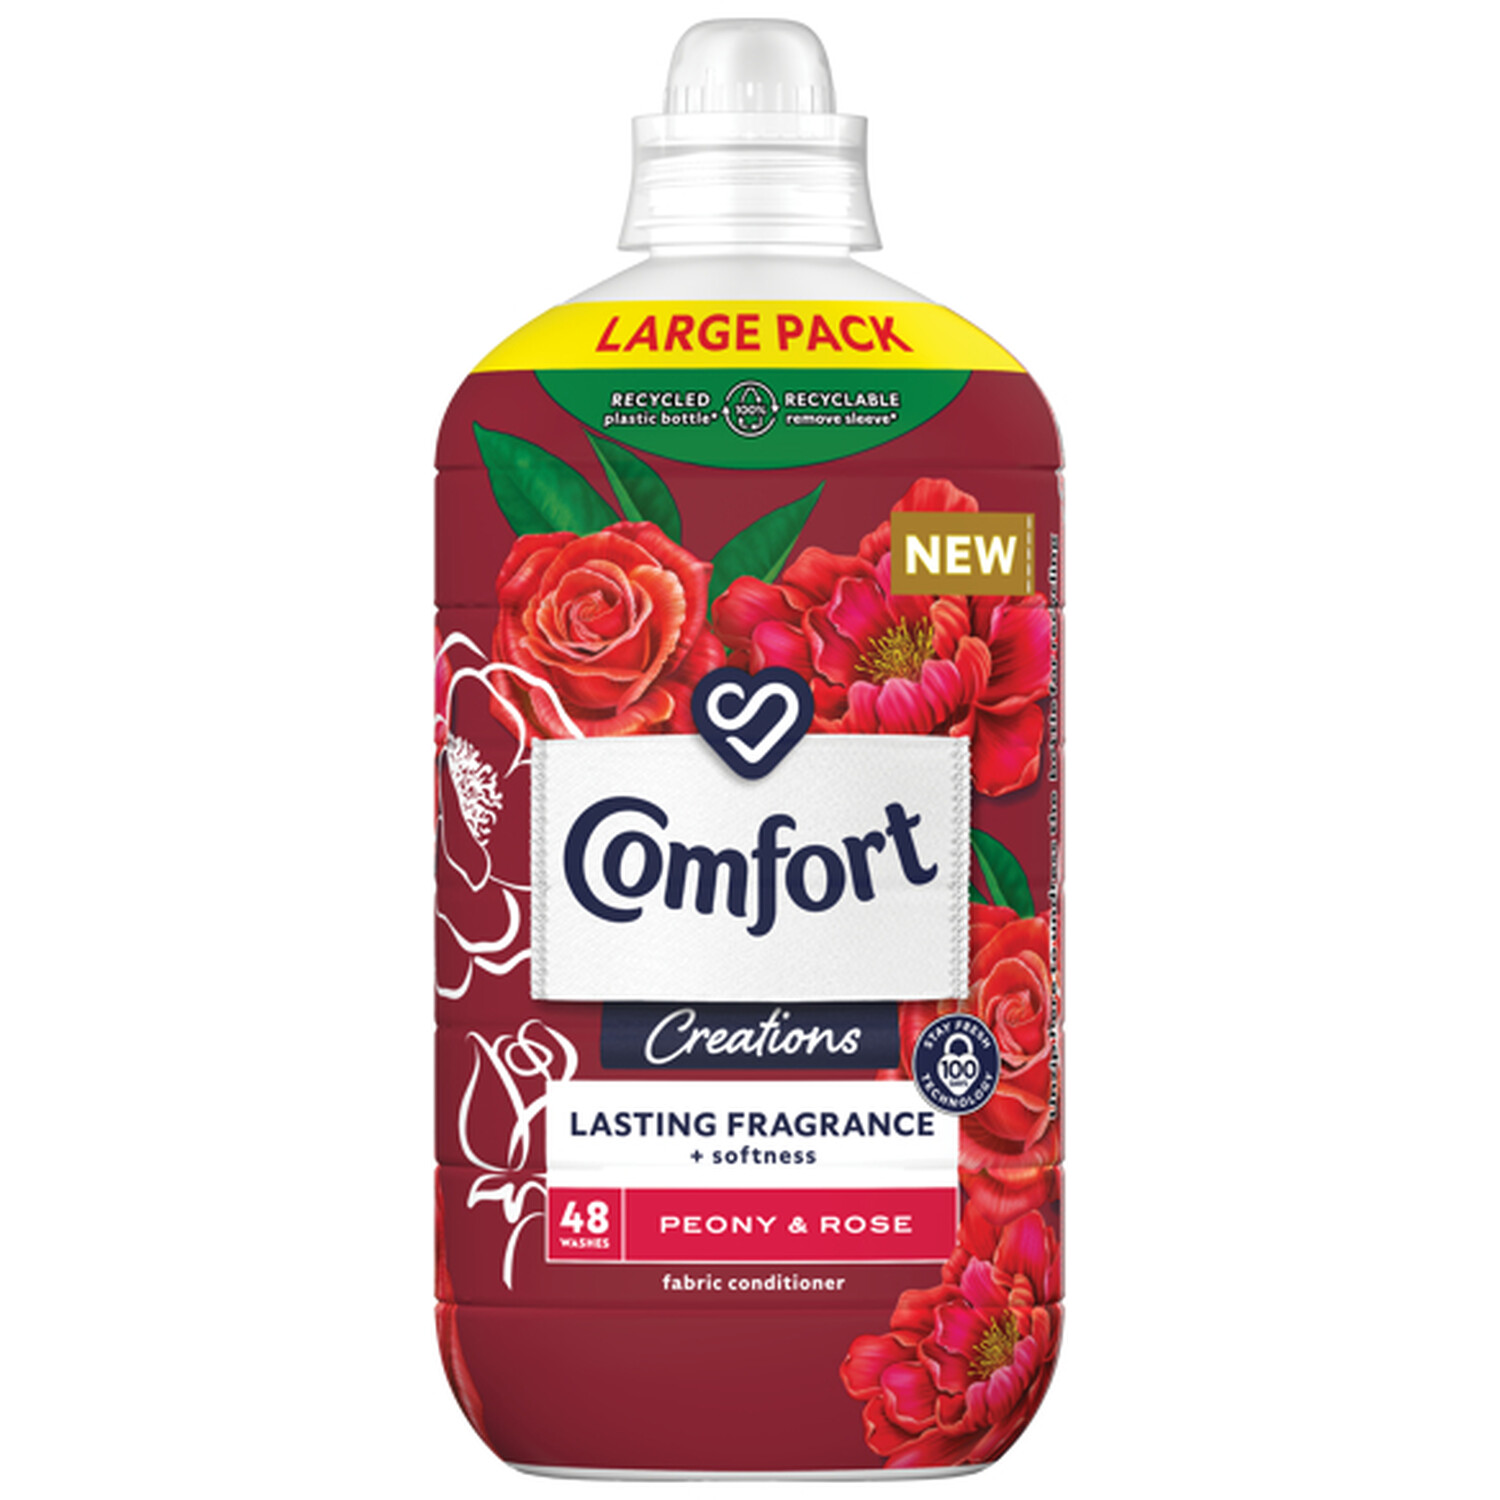 Comfort Creations Fabric Conditioner - 1.4l / Peony and Rose Image